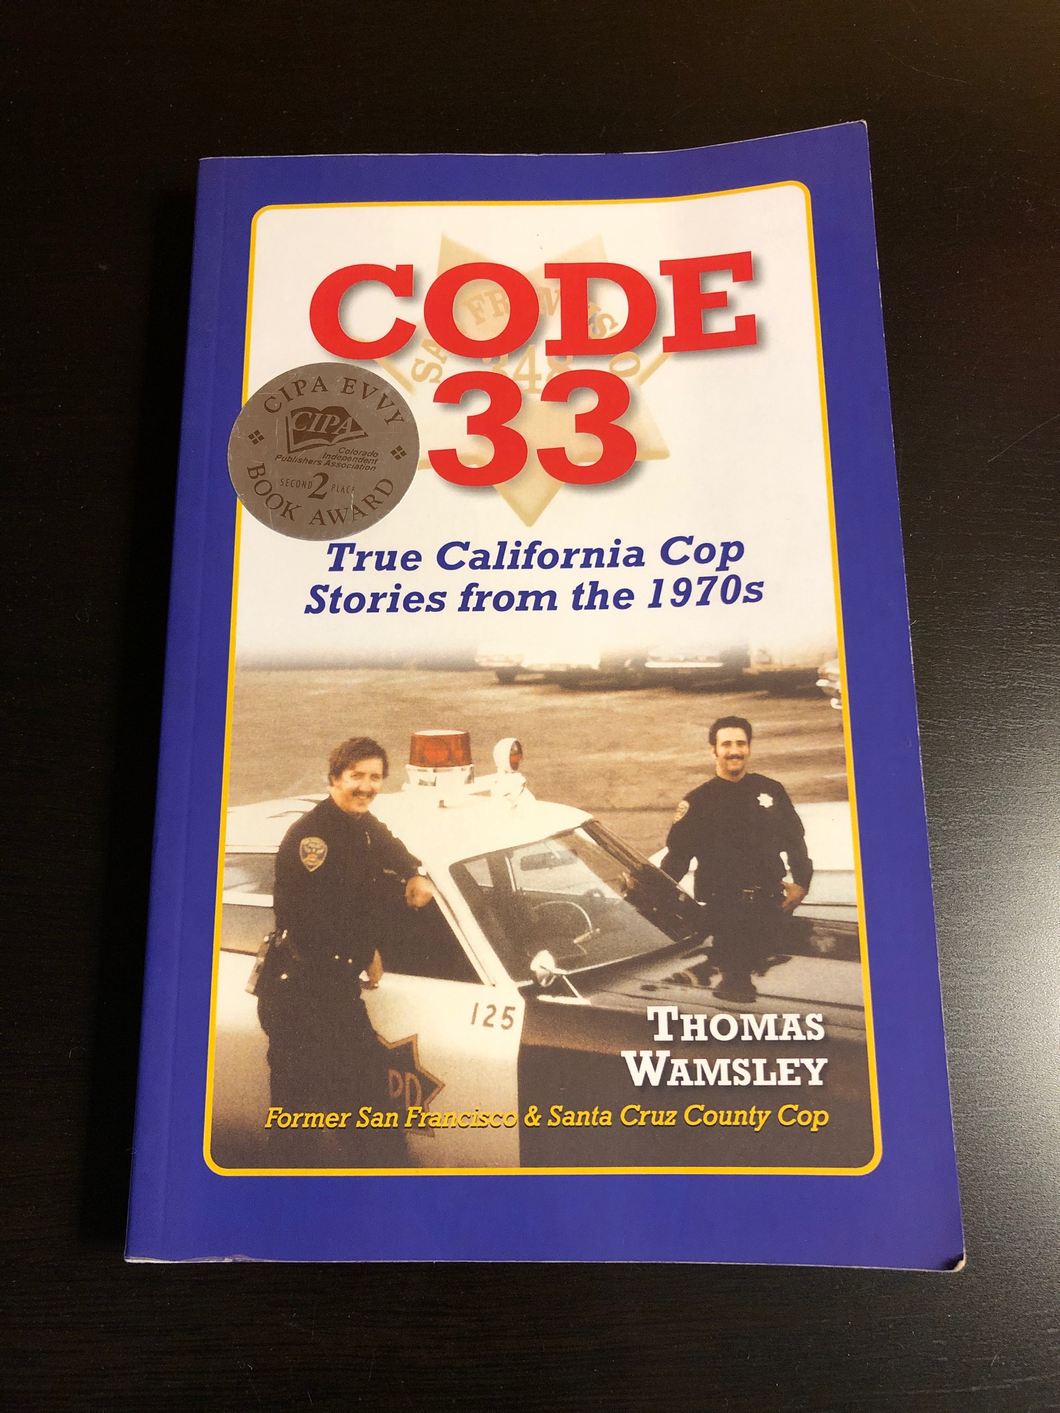 Code 33: True California Cop Stories from the 1970s